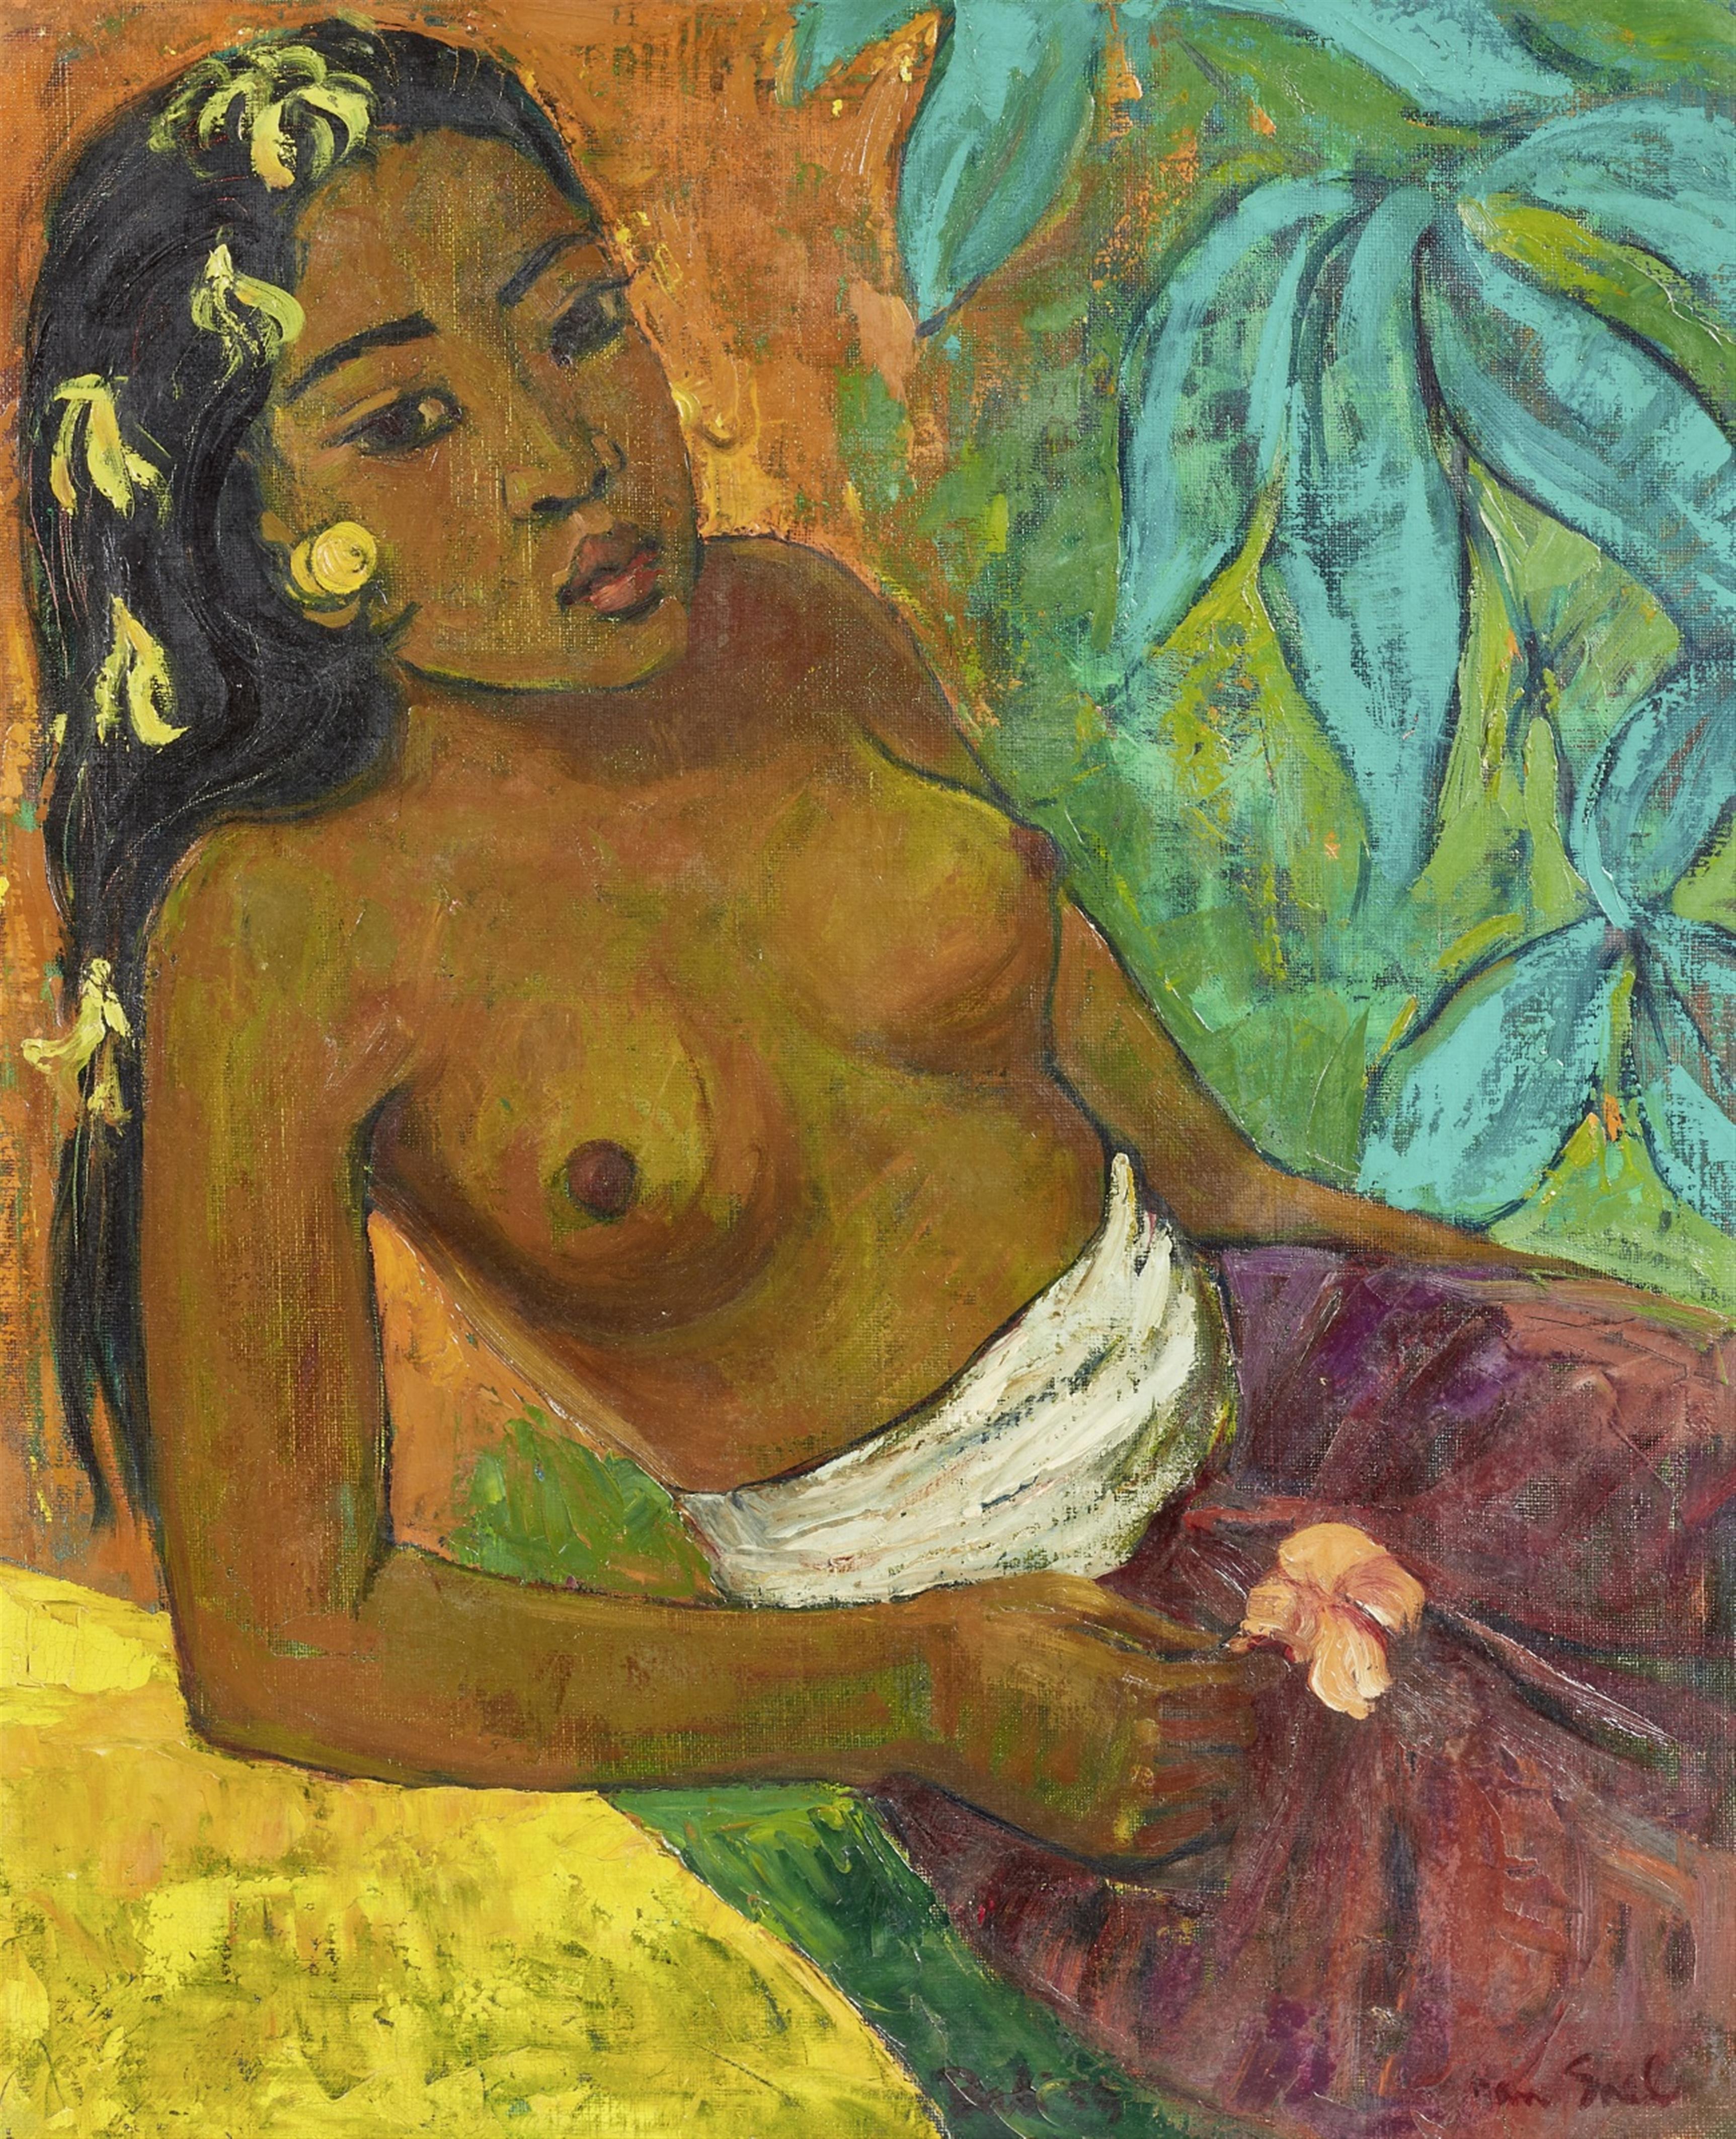 Han Snel . Around 1959 - Female semi nude with flowers in her hair. Oil on canvas. Signed Han Snel. Original wood frame. - image-1